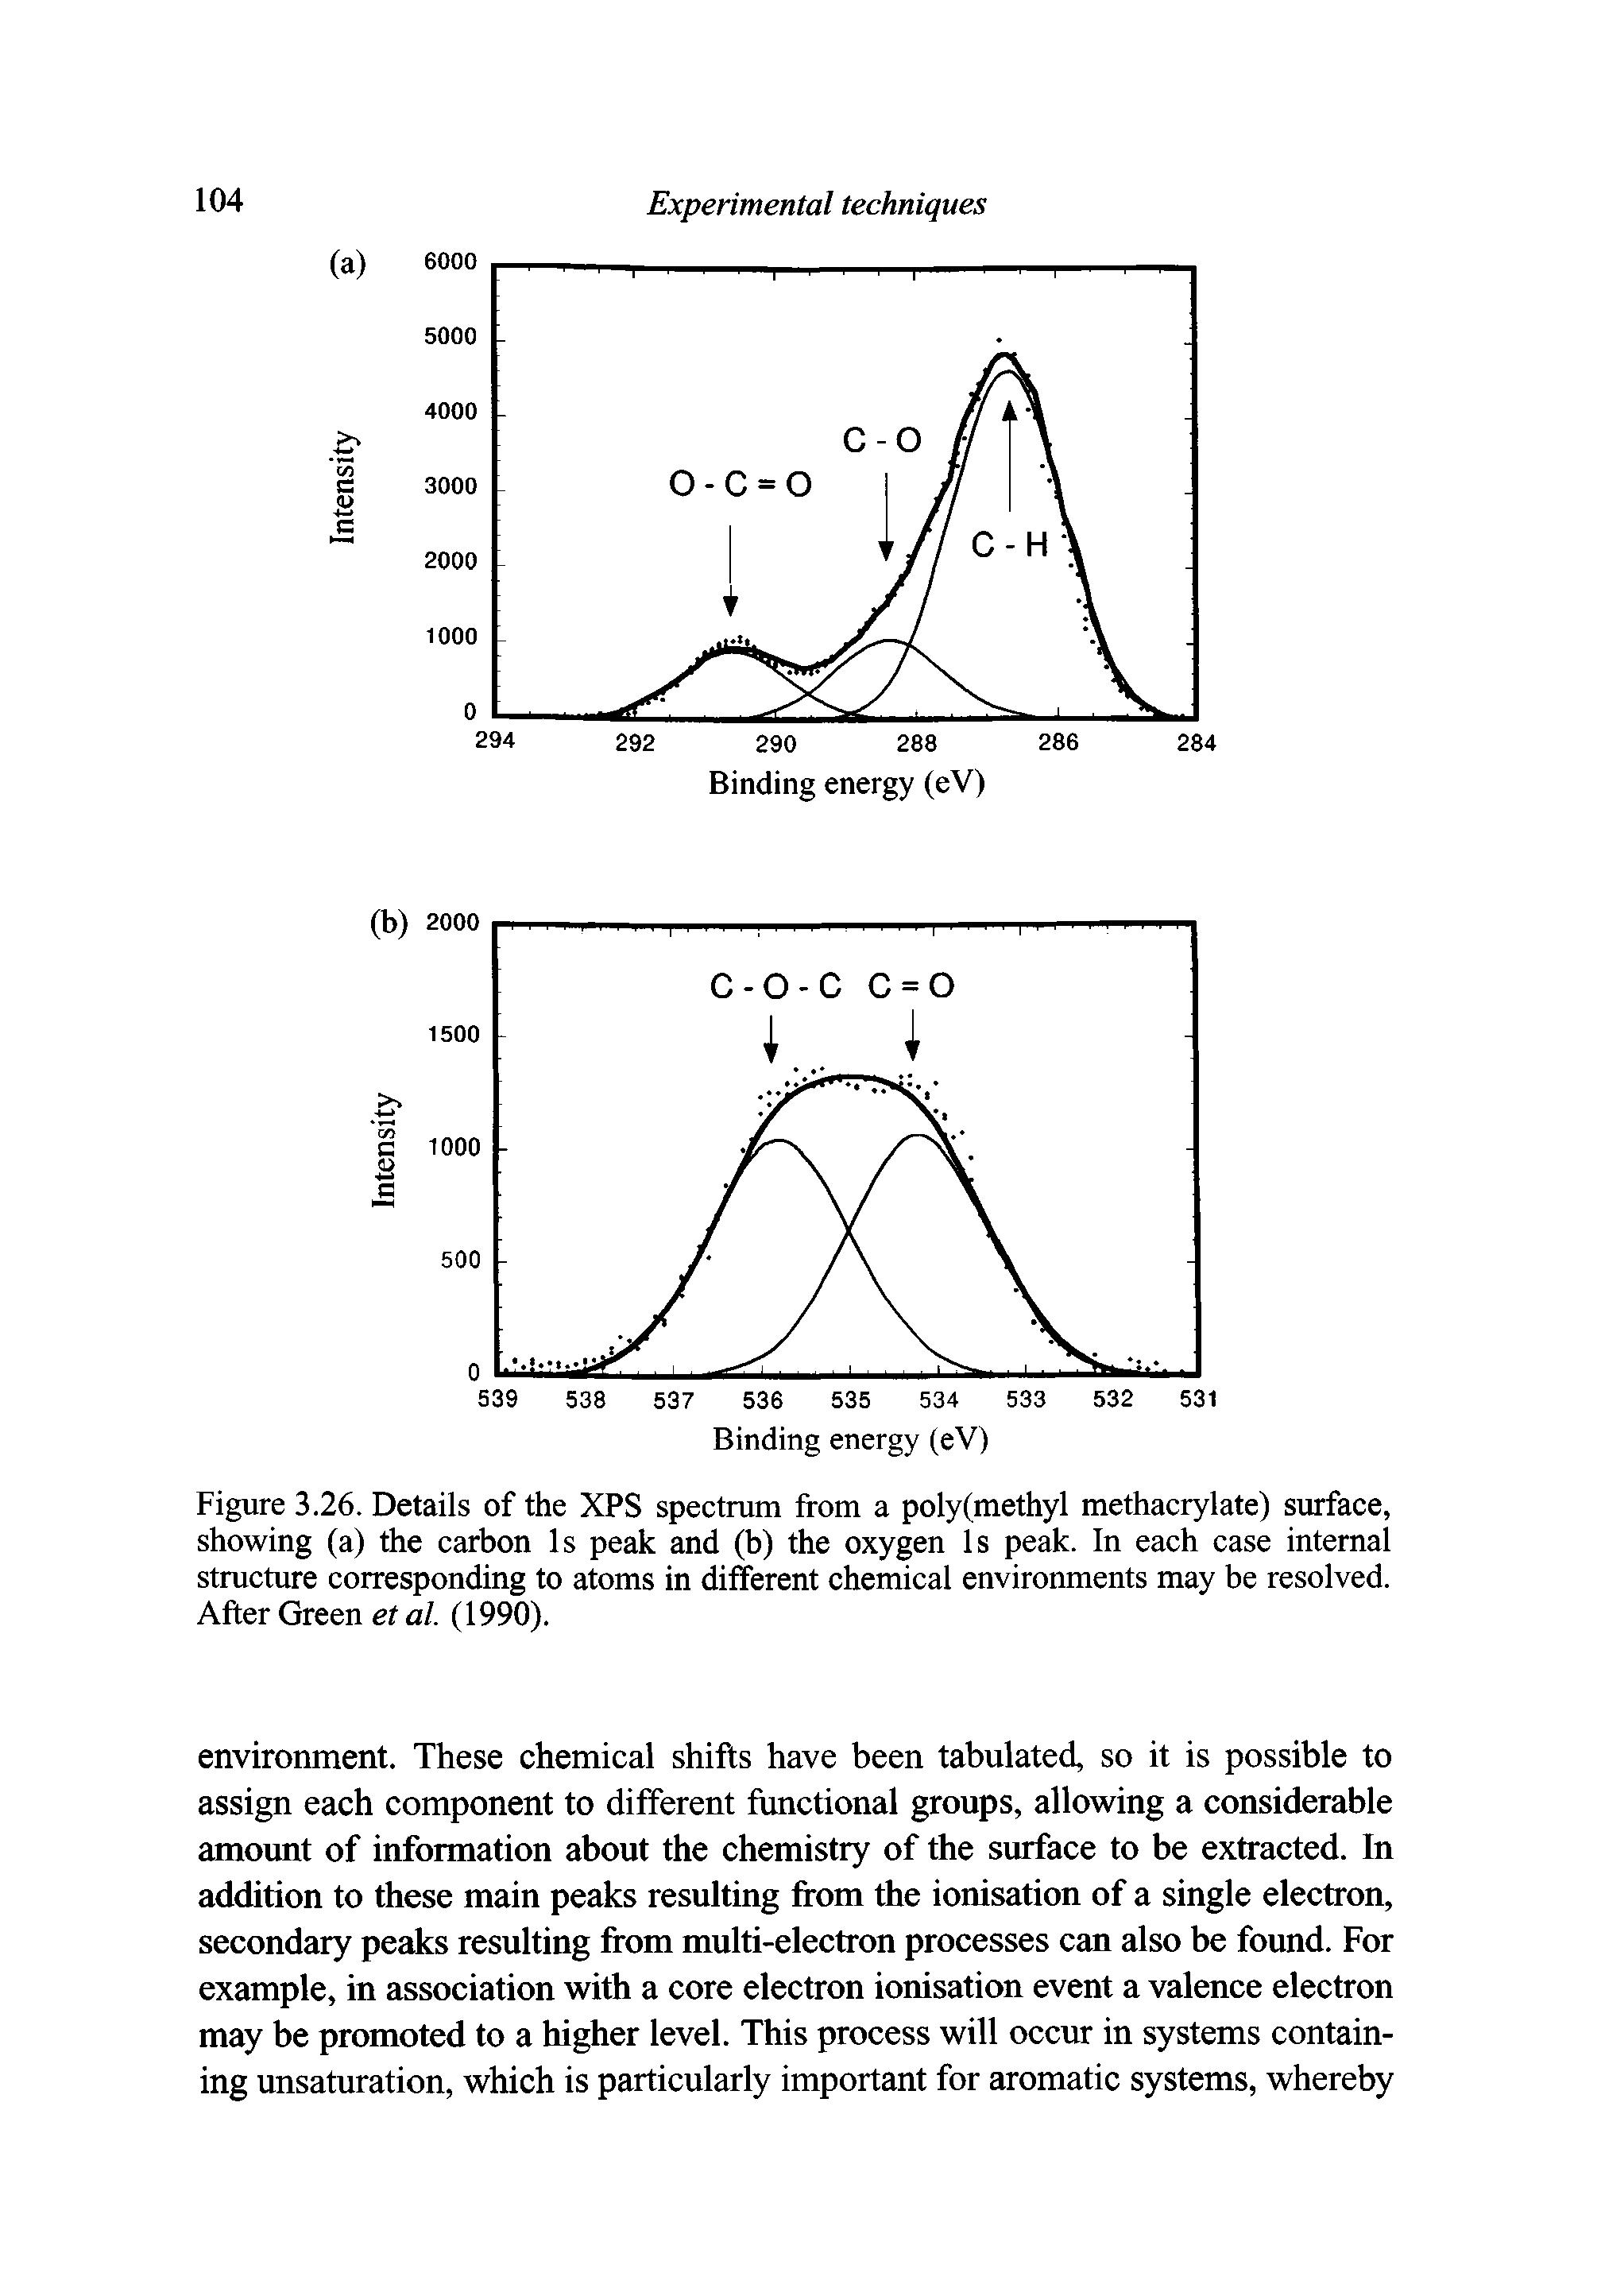 Figure 3.26. Details of the XPS spectrum from a poly(methyl methacrylate) surface, showing (a) the carbon Is peak and (b) the oxygen Is peak. In each case internal structure corresponding to atoms in different chemical environments may be resolved. After Green et al. (1990).